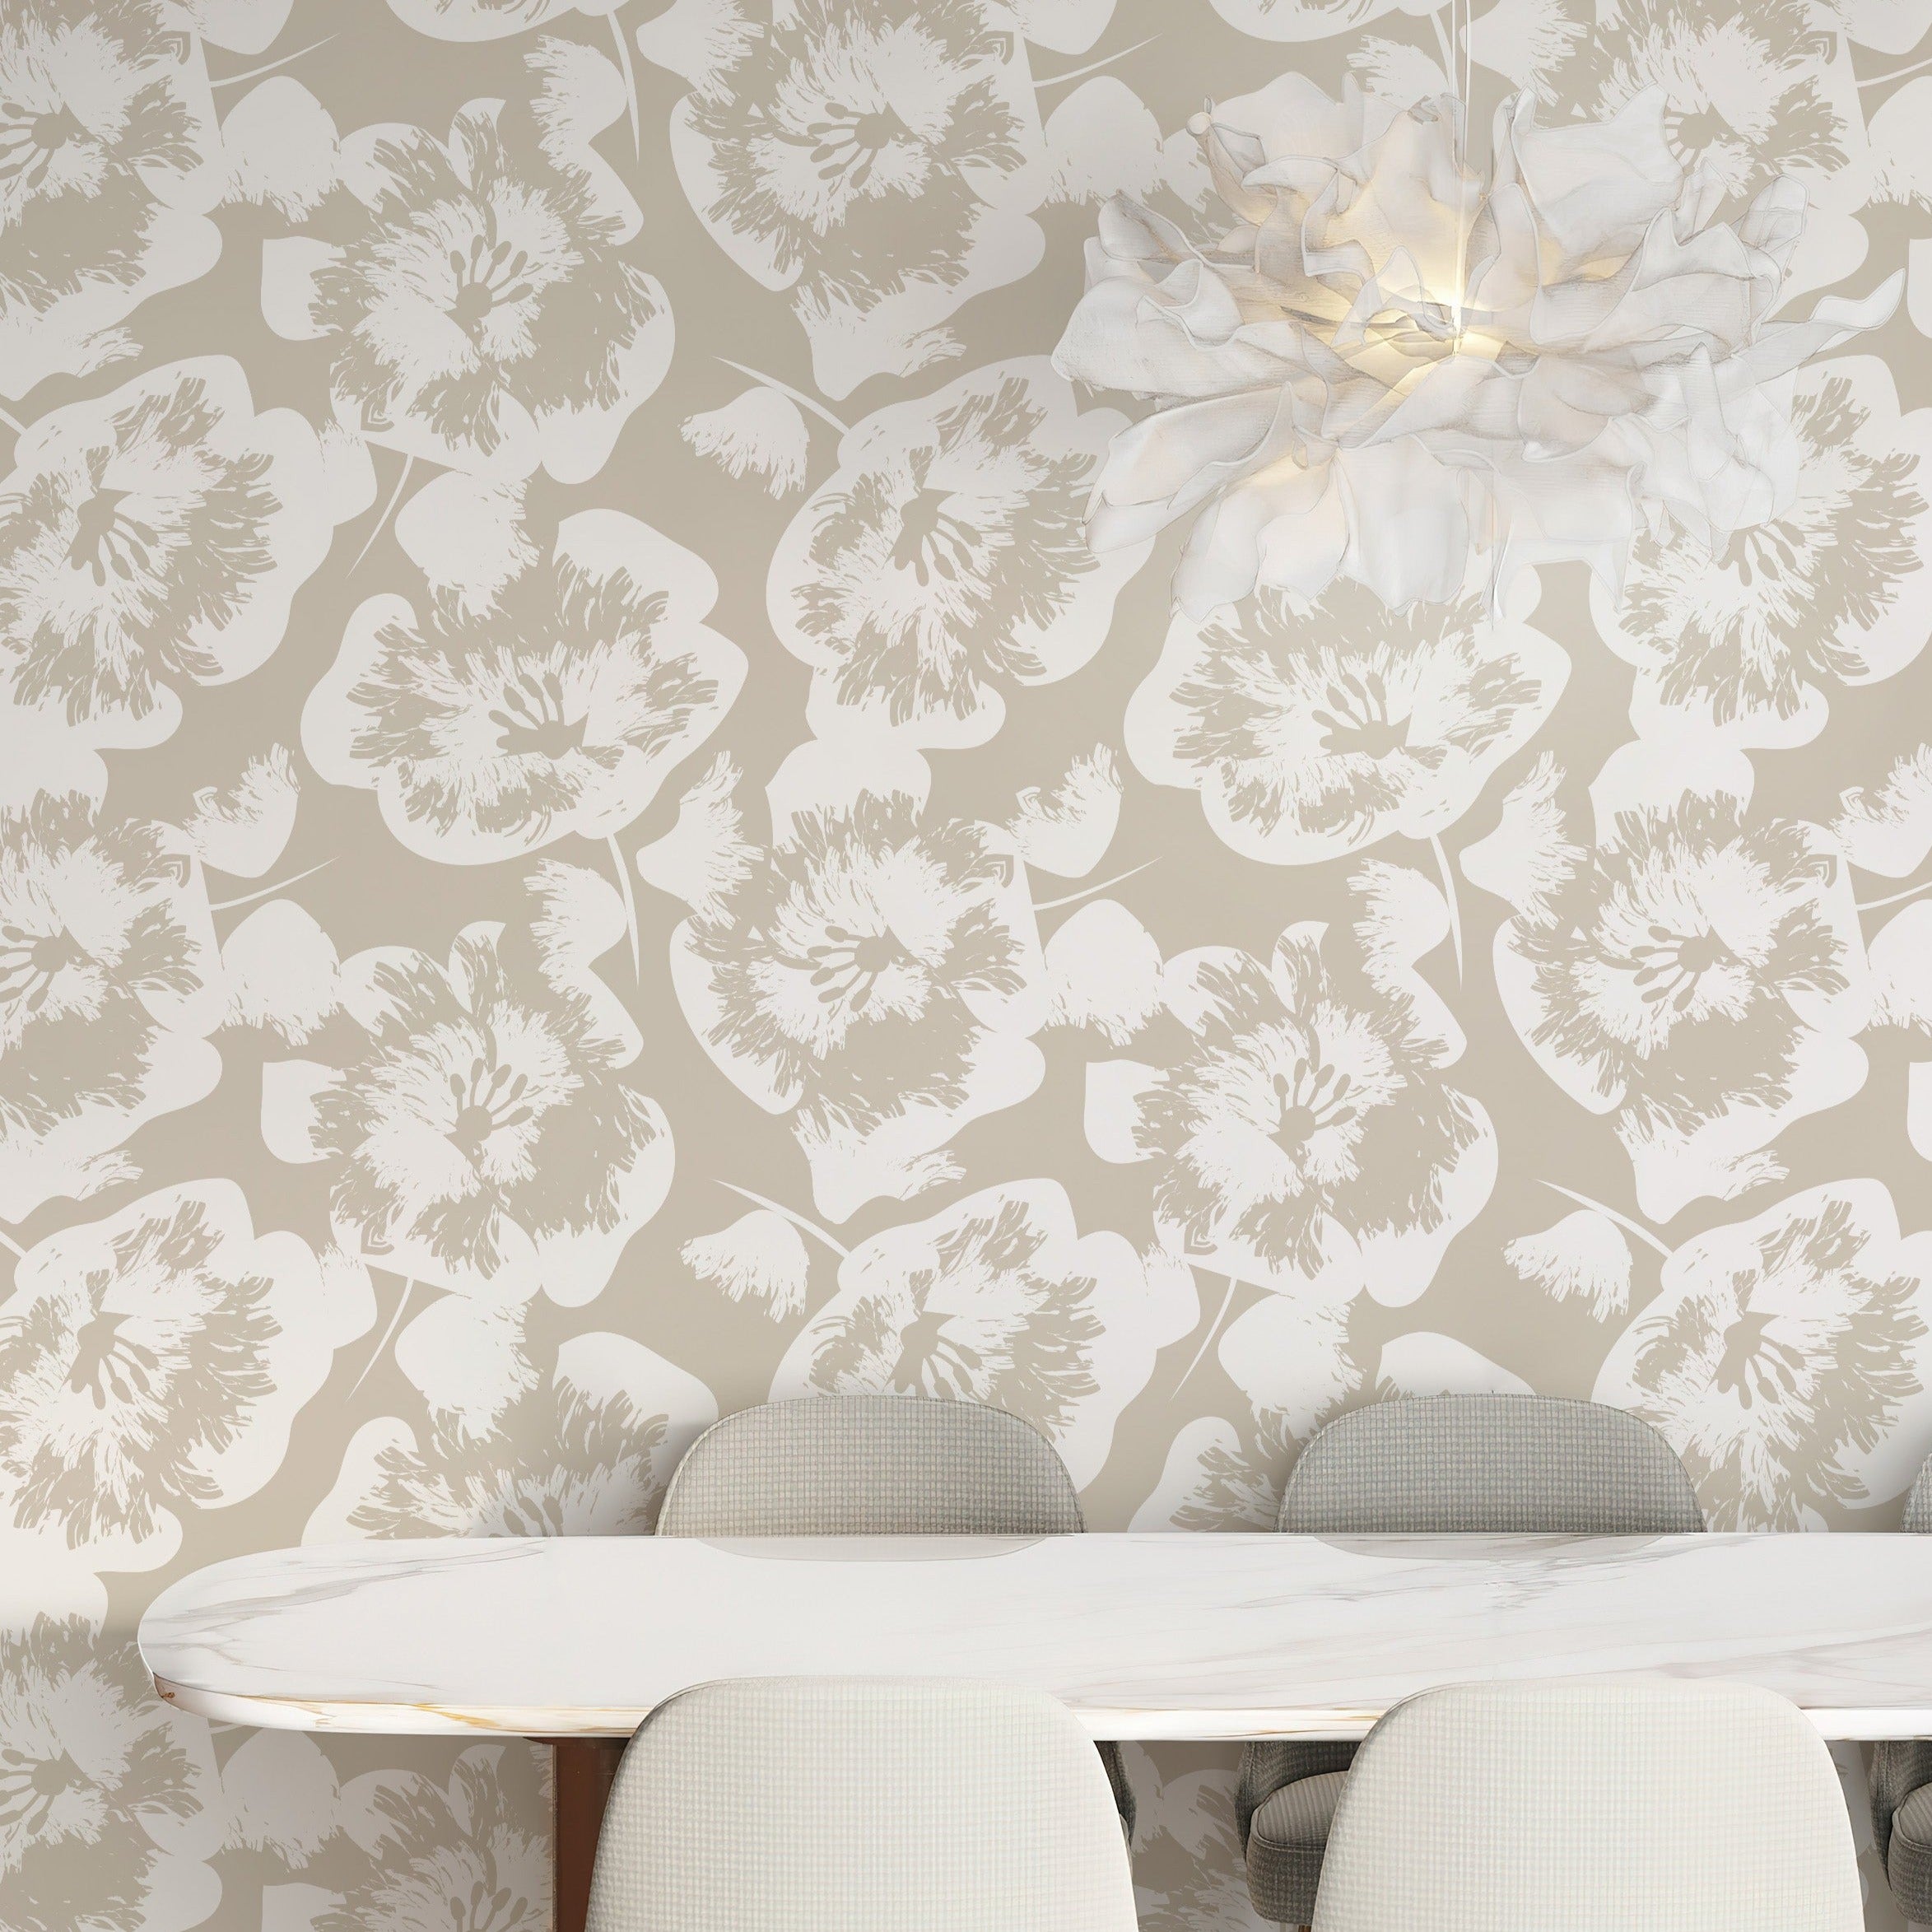 A cozy dining area adorned with Stamped Floral Wallpaper, creating an inviting ambiance with its large, hand-stamped flower motif in a soothing beige palette. The design complements the modern furniture and adds a touch of nature-inspired elegance.